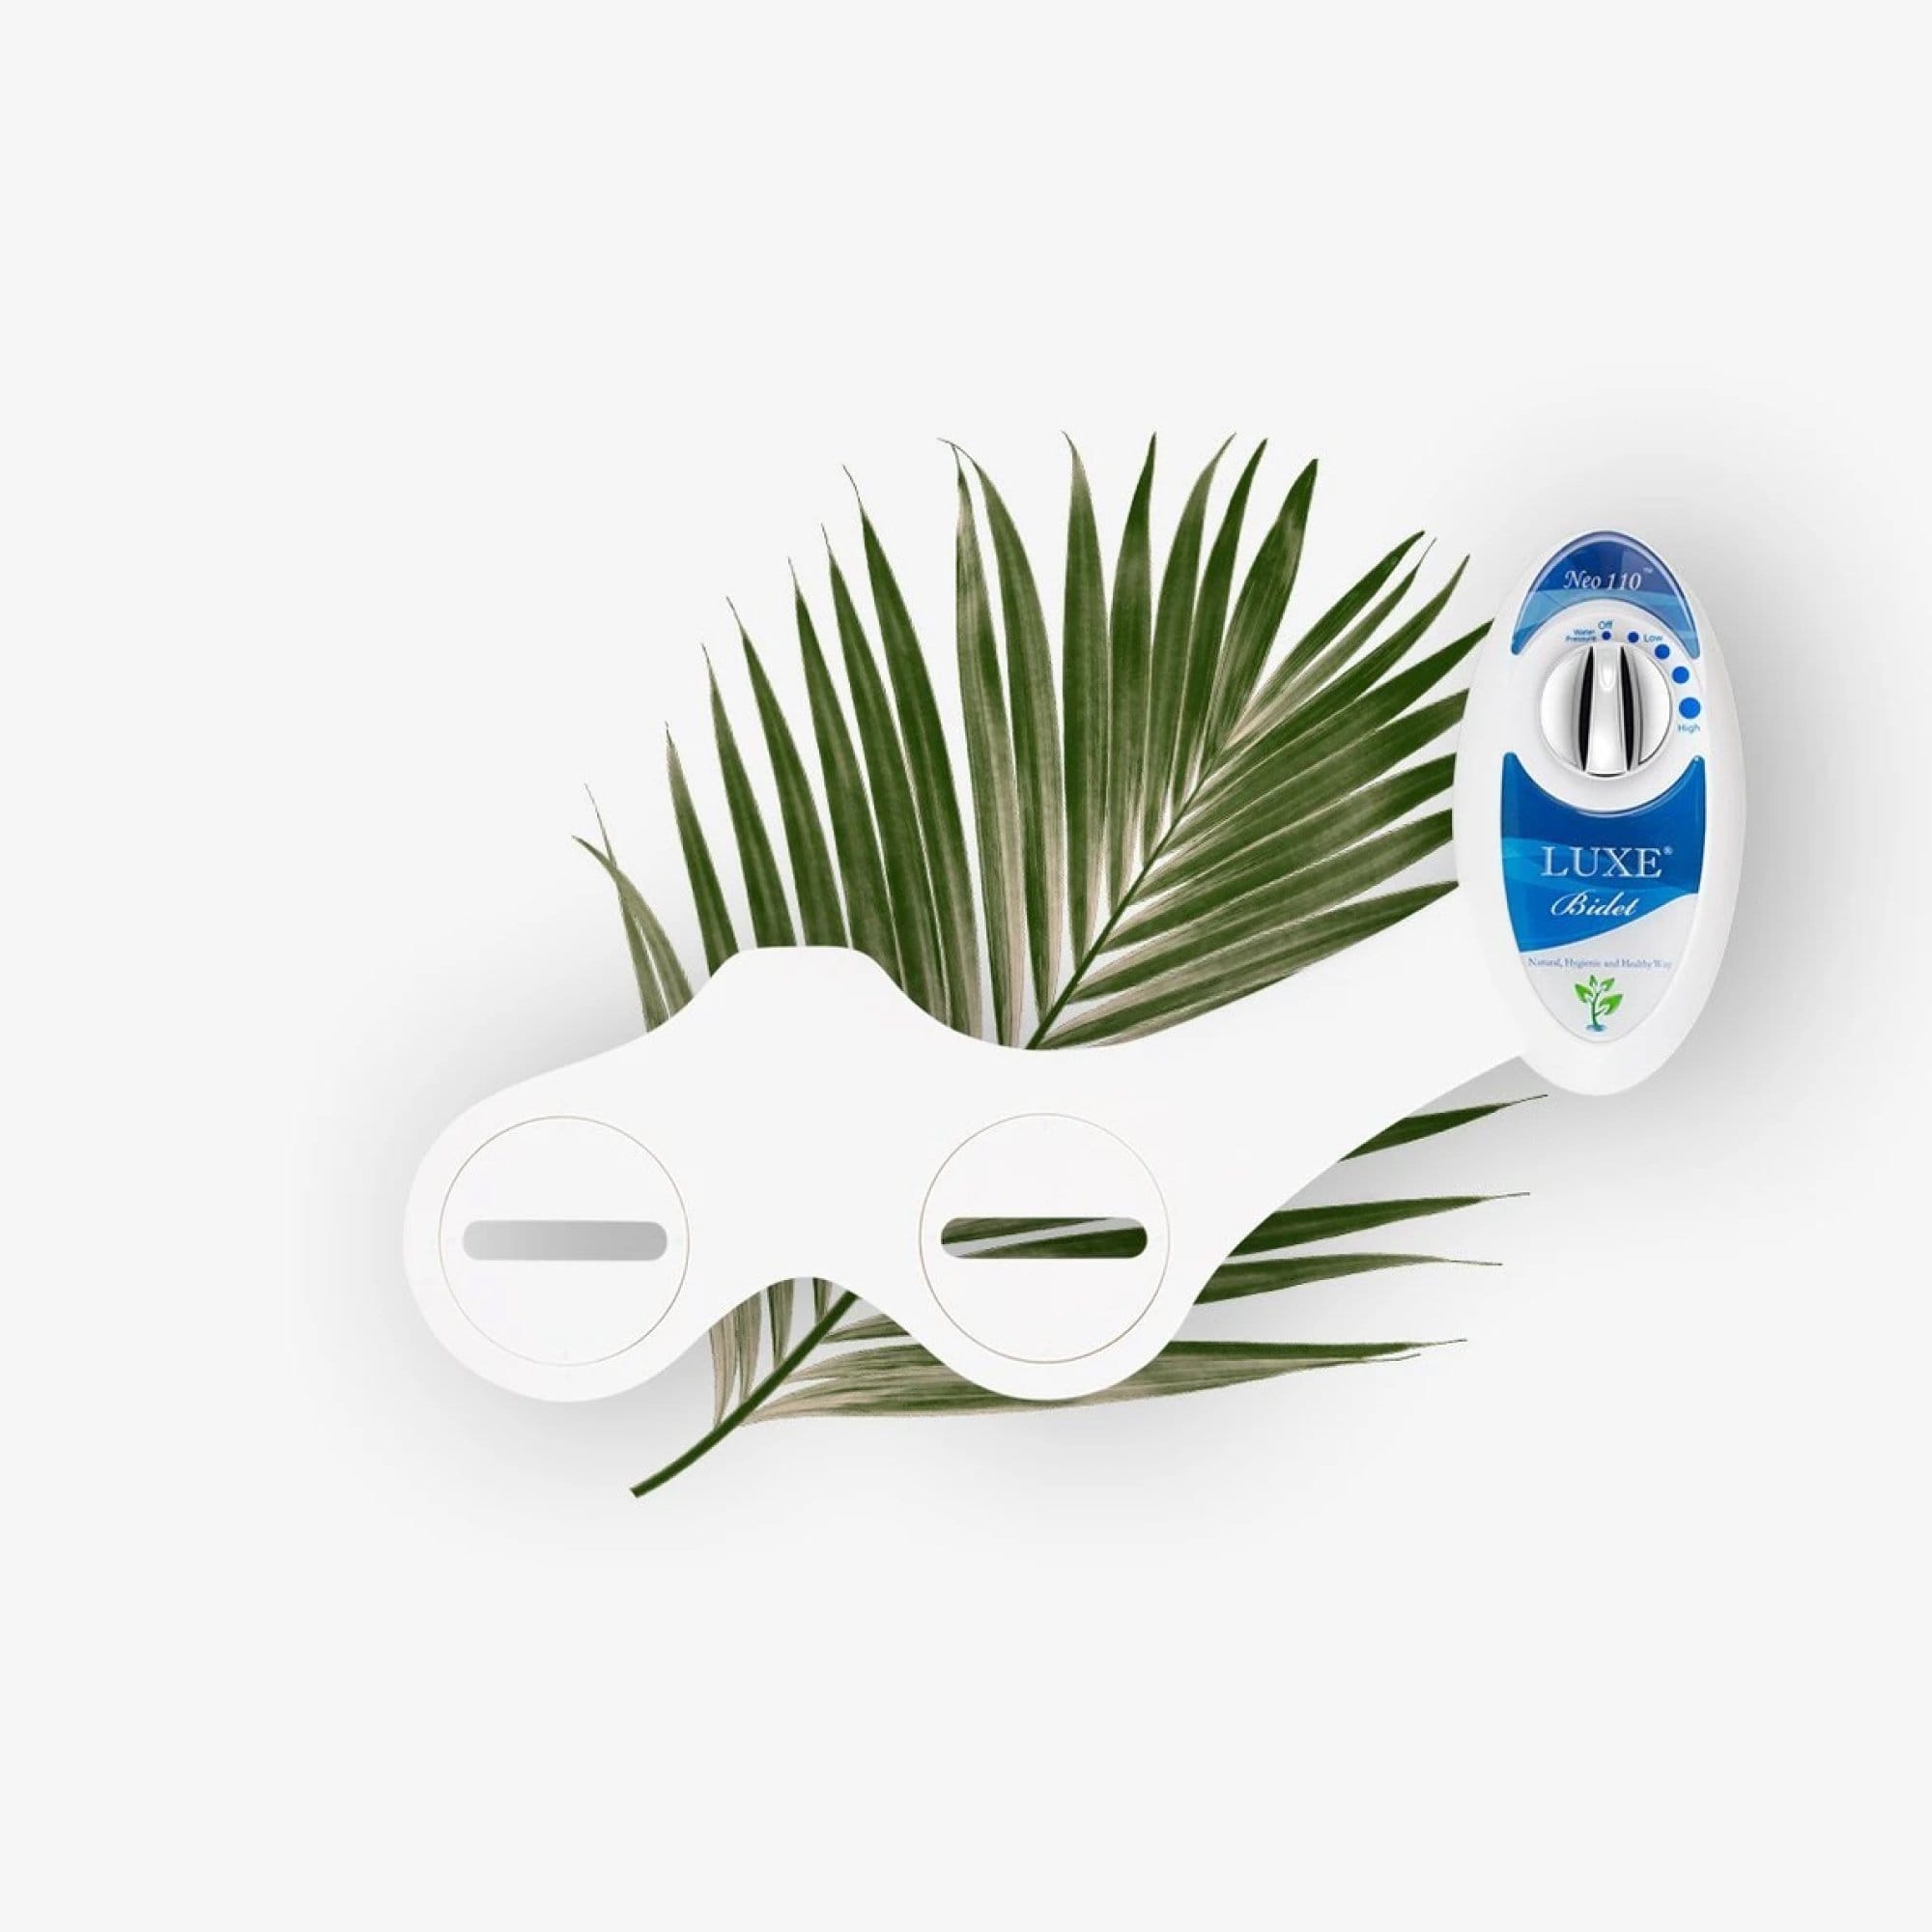 NEO 110: Imperfect Packaging - NEO 110 Blue bidet body shown with a leaf background